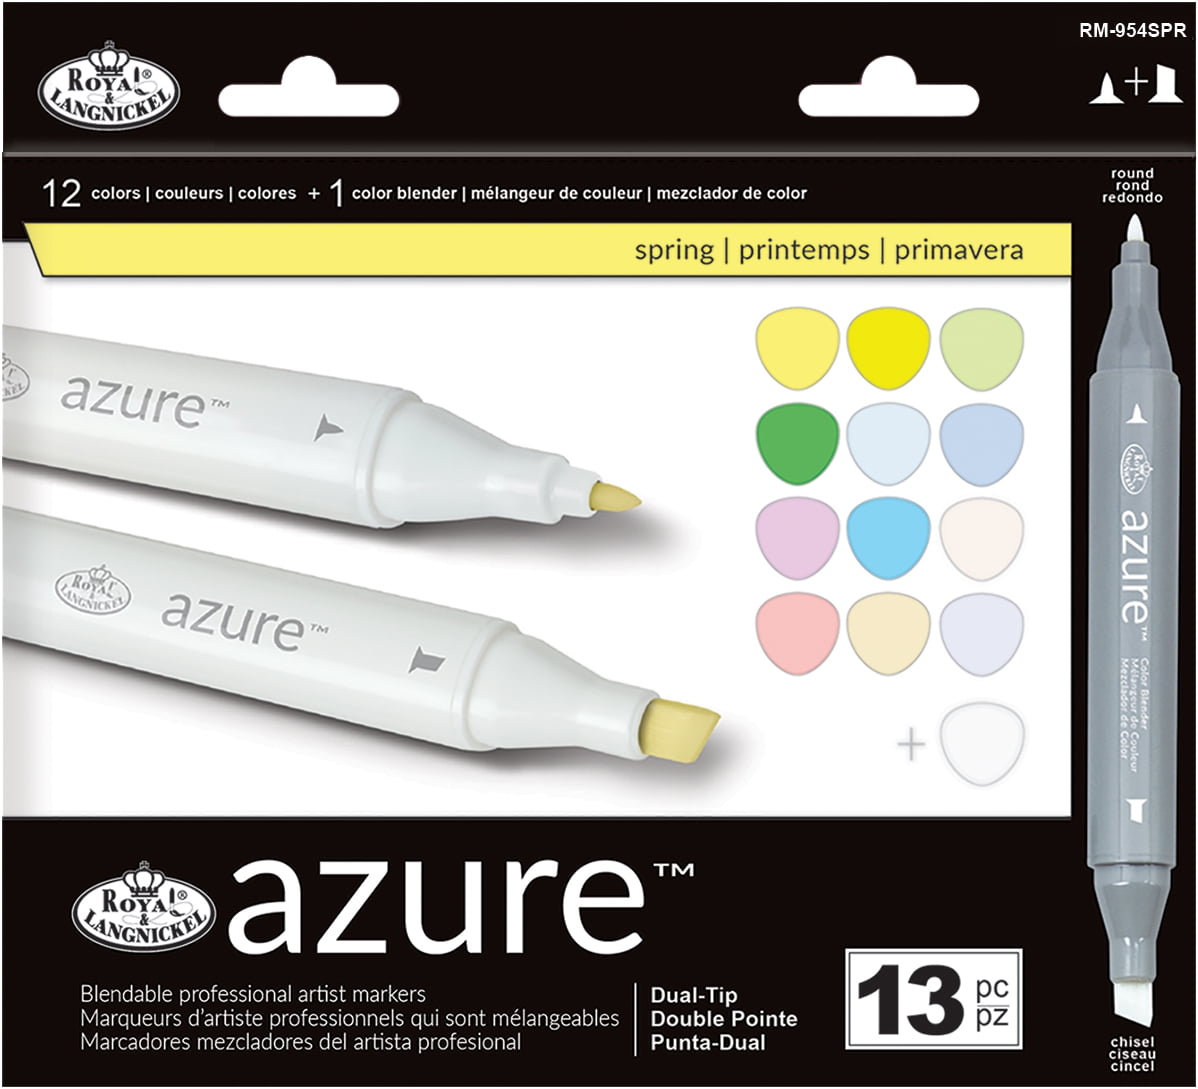 Royal and Langnickel - Azure Artist Markers - Dual Tip - 5 Colours +  Blender - Complexion Set of 6